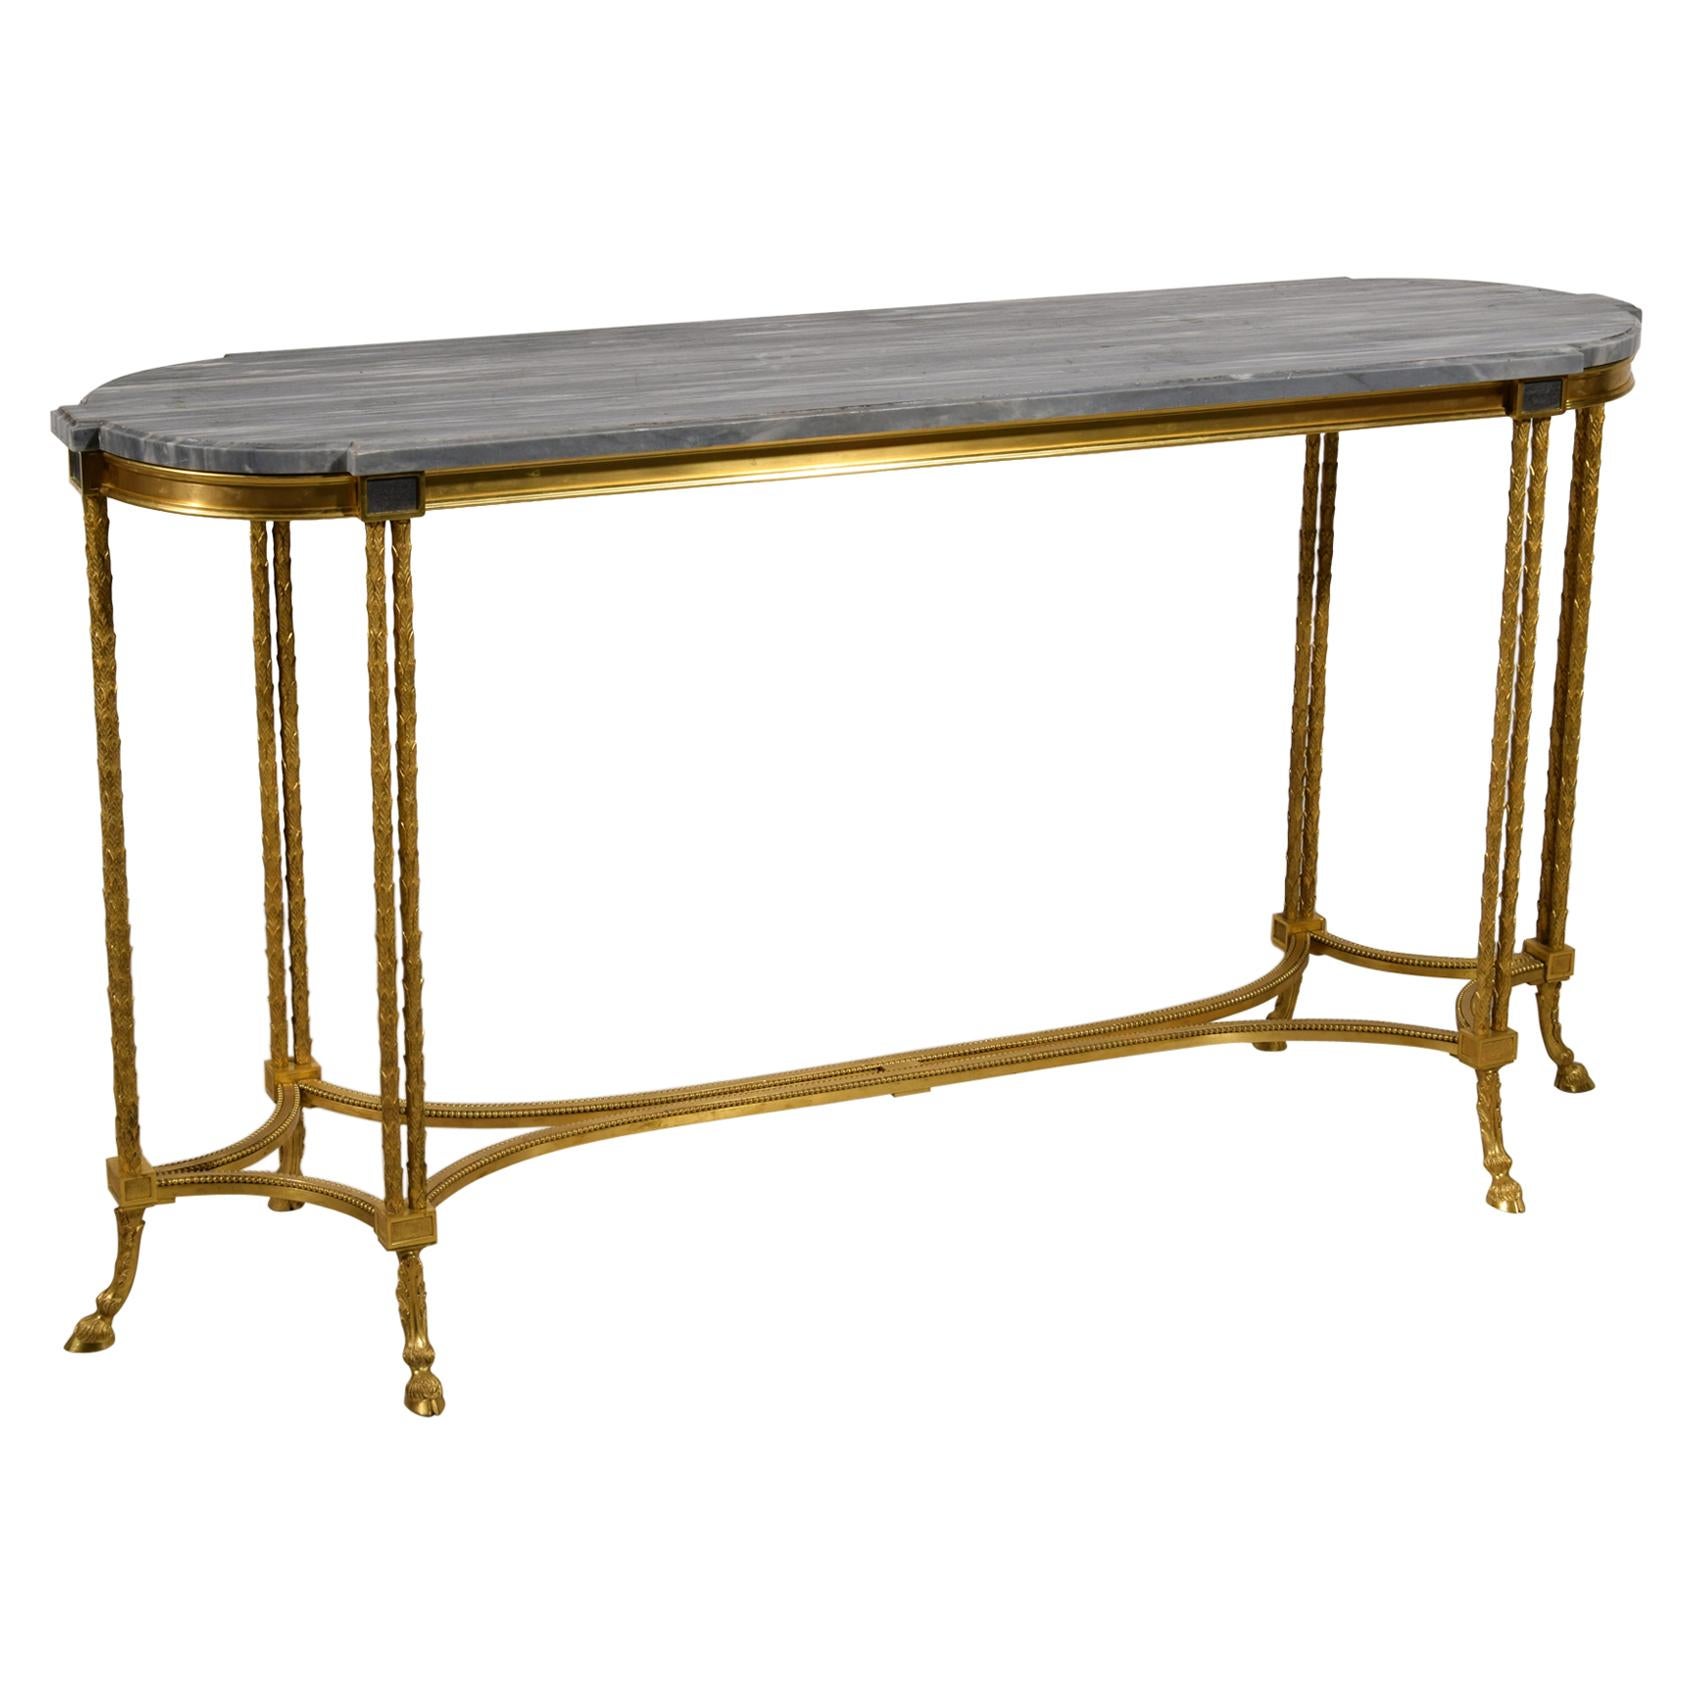 20th century, French Gilt Bronze Console Table by Maison Baguès  For Sale